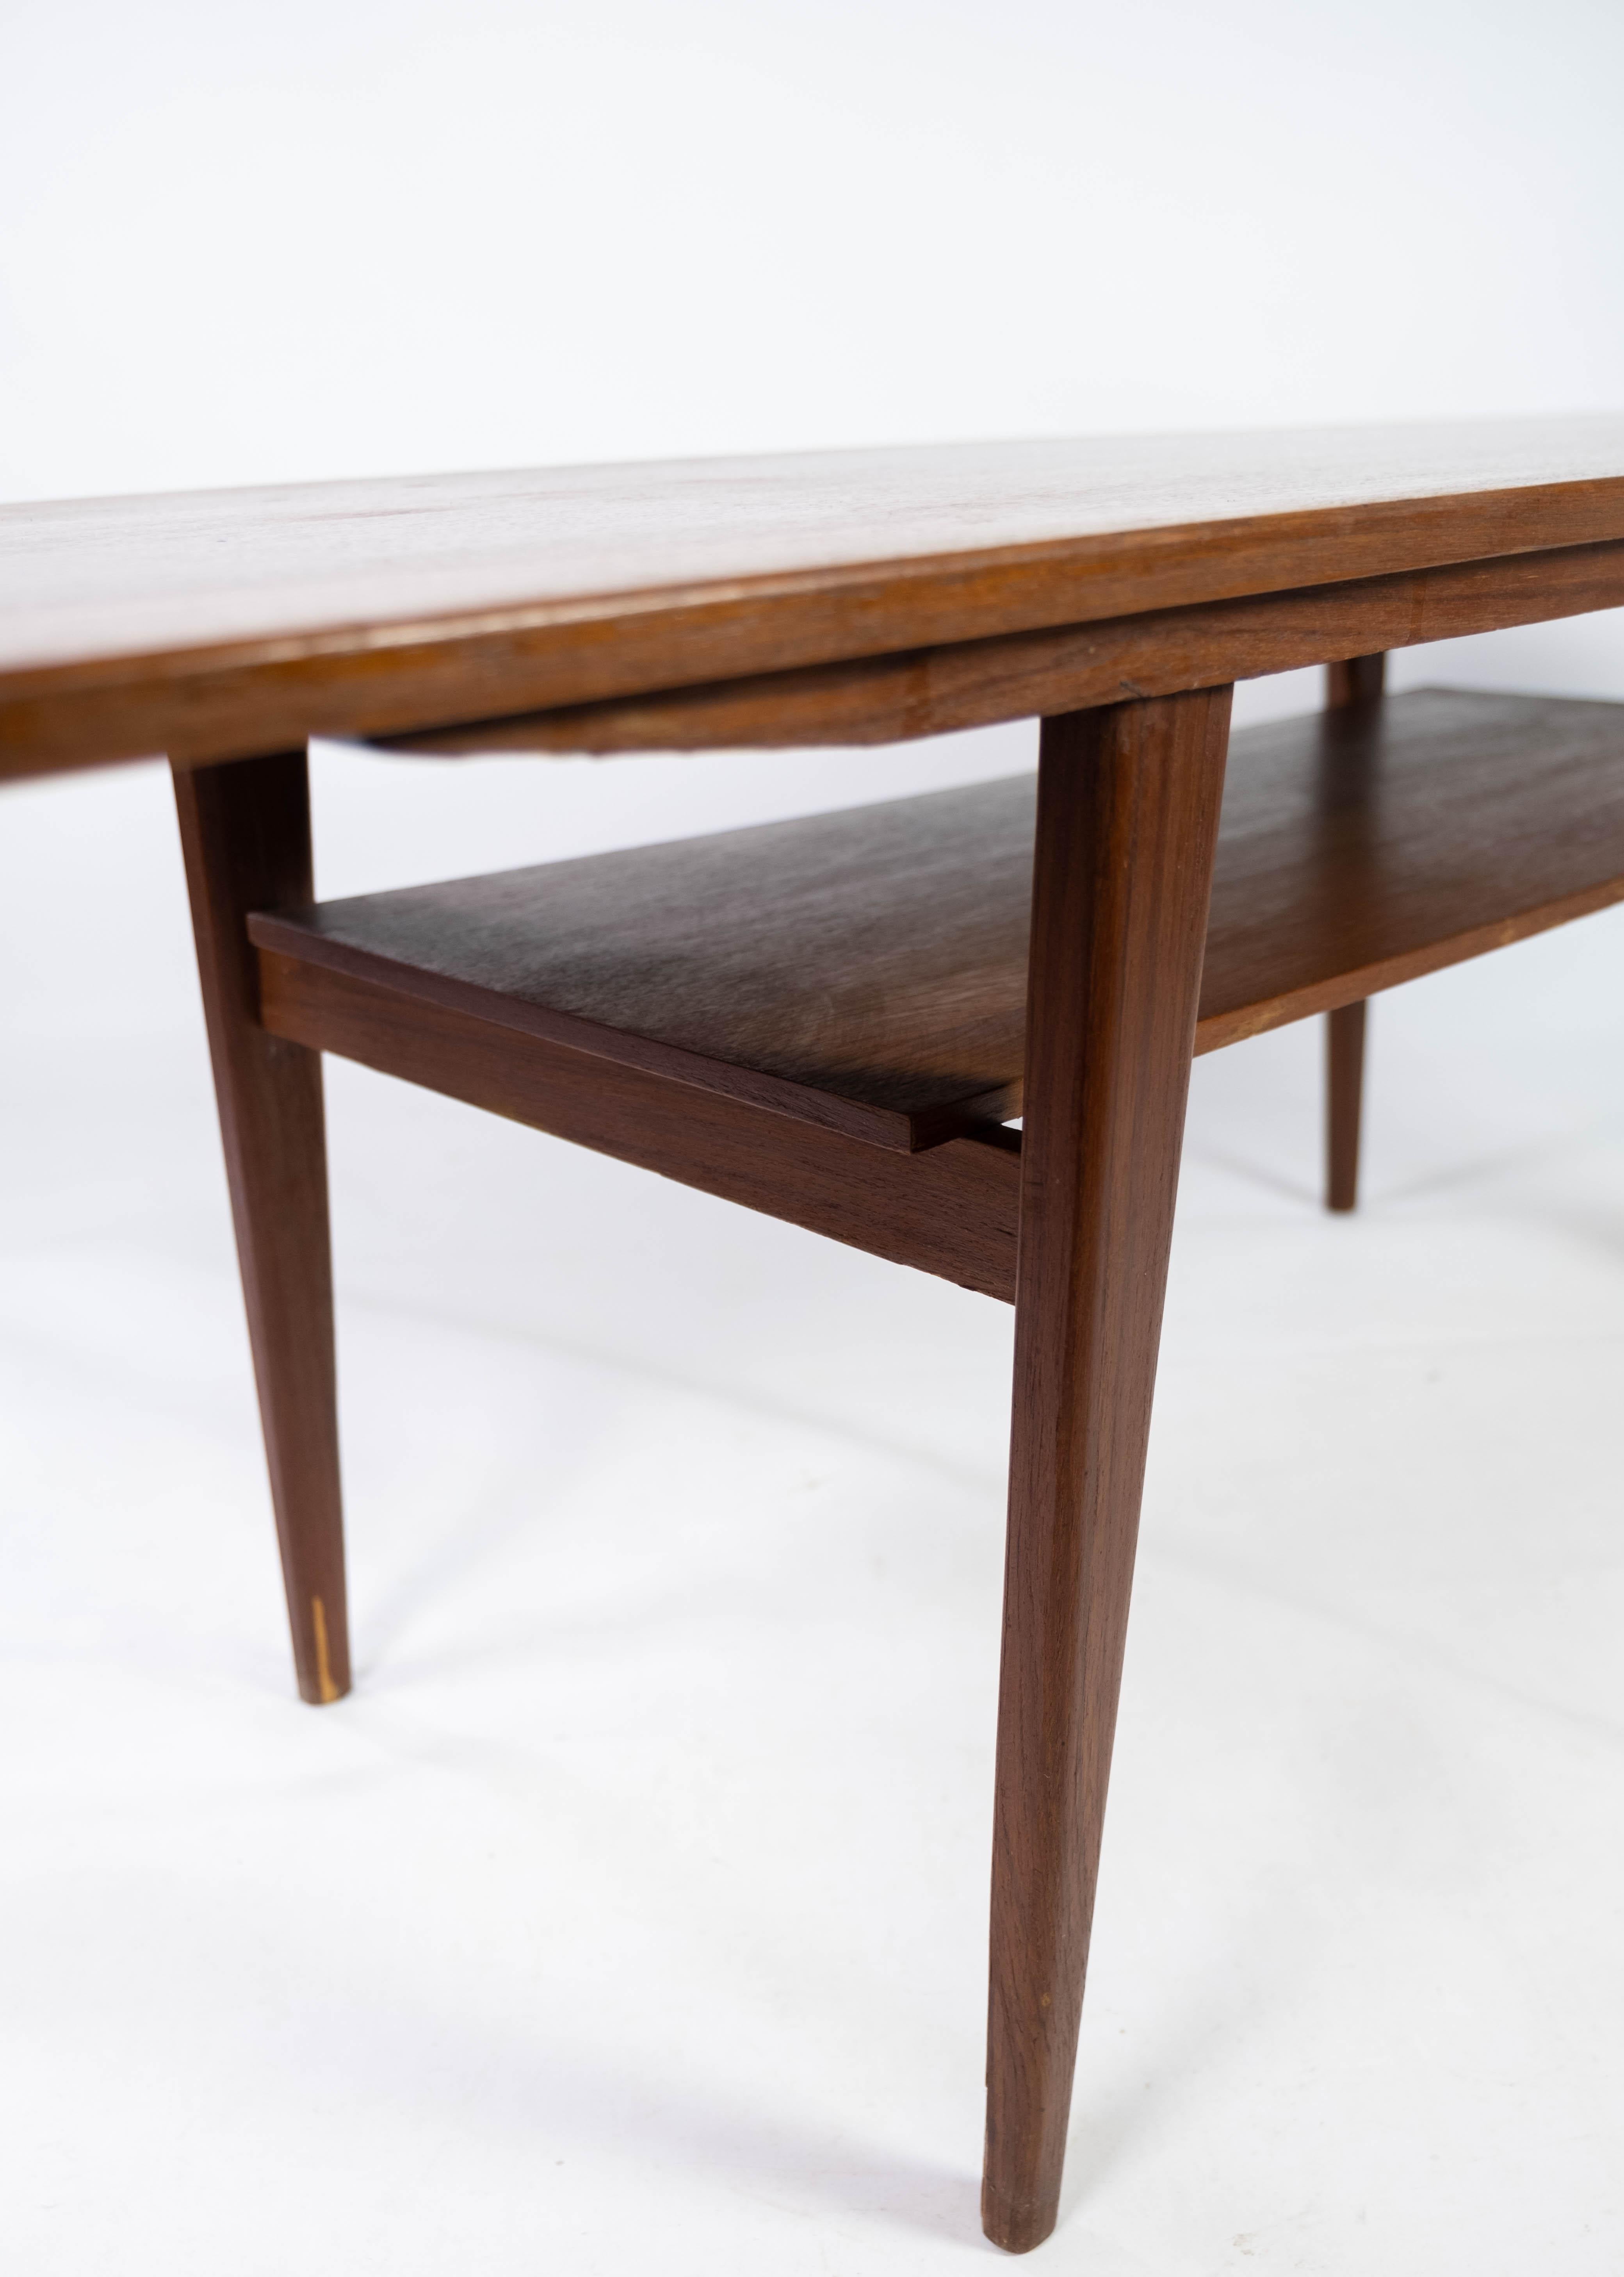 Coffee Table Made In Teak With Shelf, Danish Design From 1960s For Sale 5